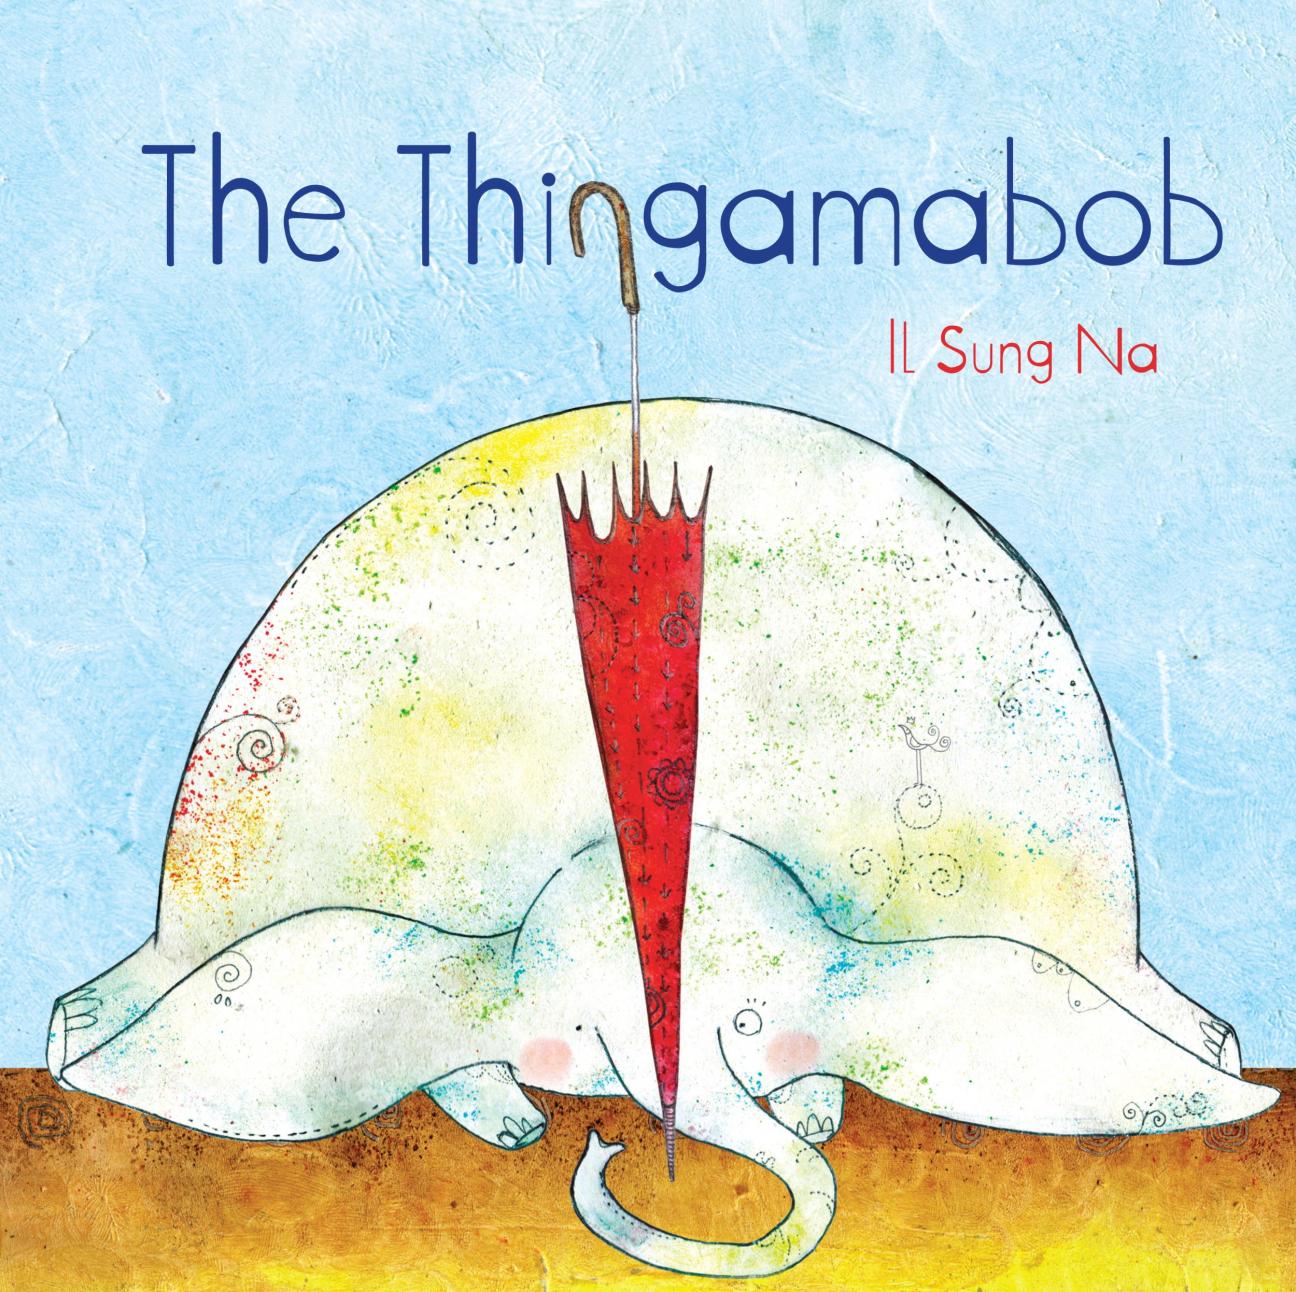 The cover of "The Thingamabob" by Il Sung Na, which has a drawing of a colorful elephant lying down and inspecting a closed red umbrella. The title is at the top in a whimsical blue font, with the author underneath it on the right in red.